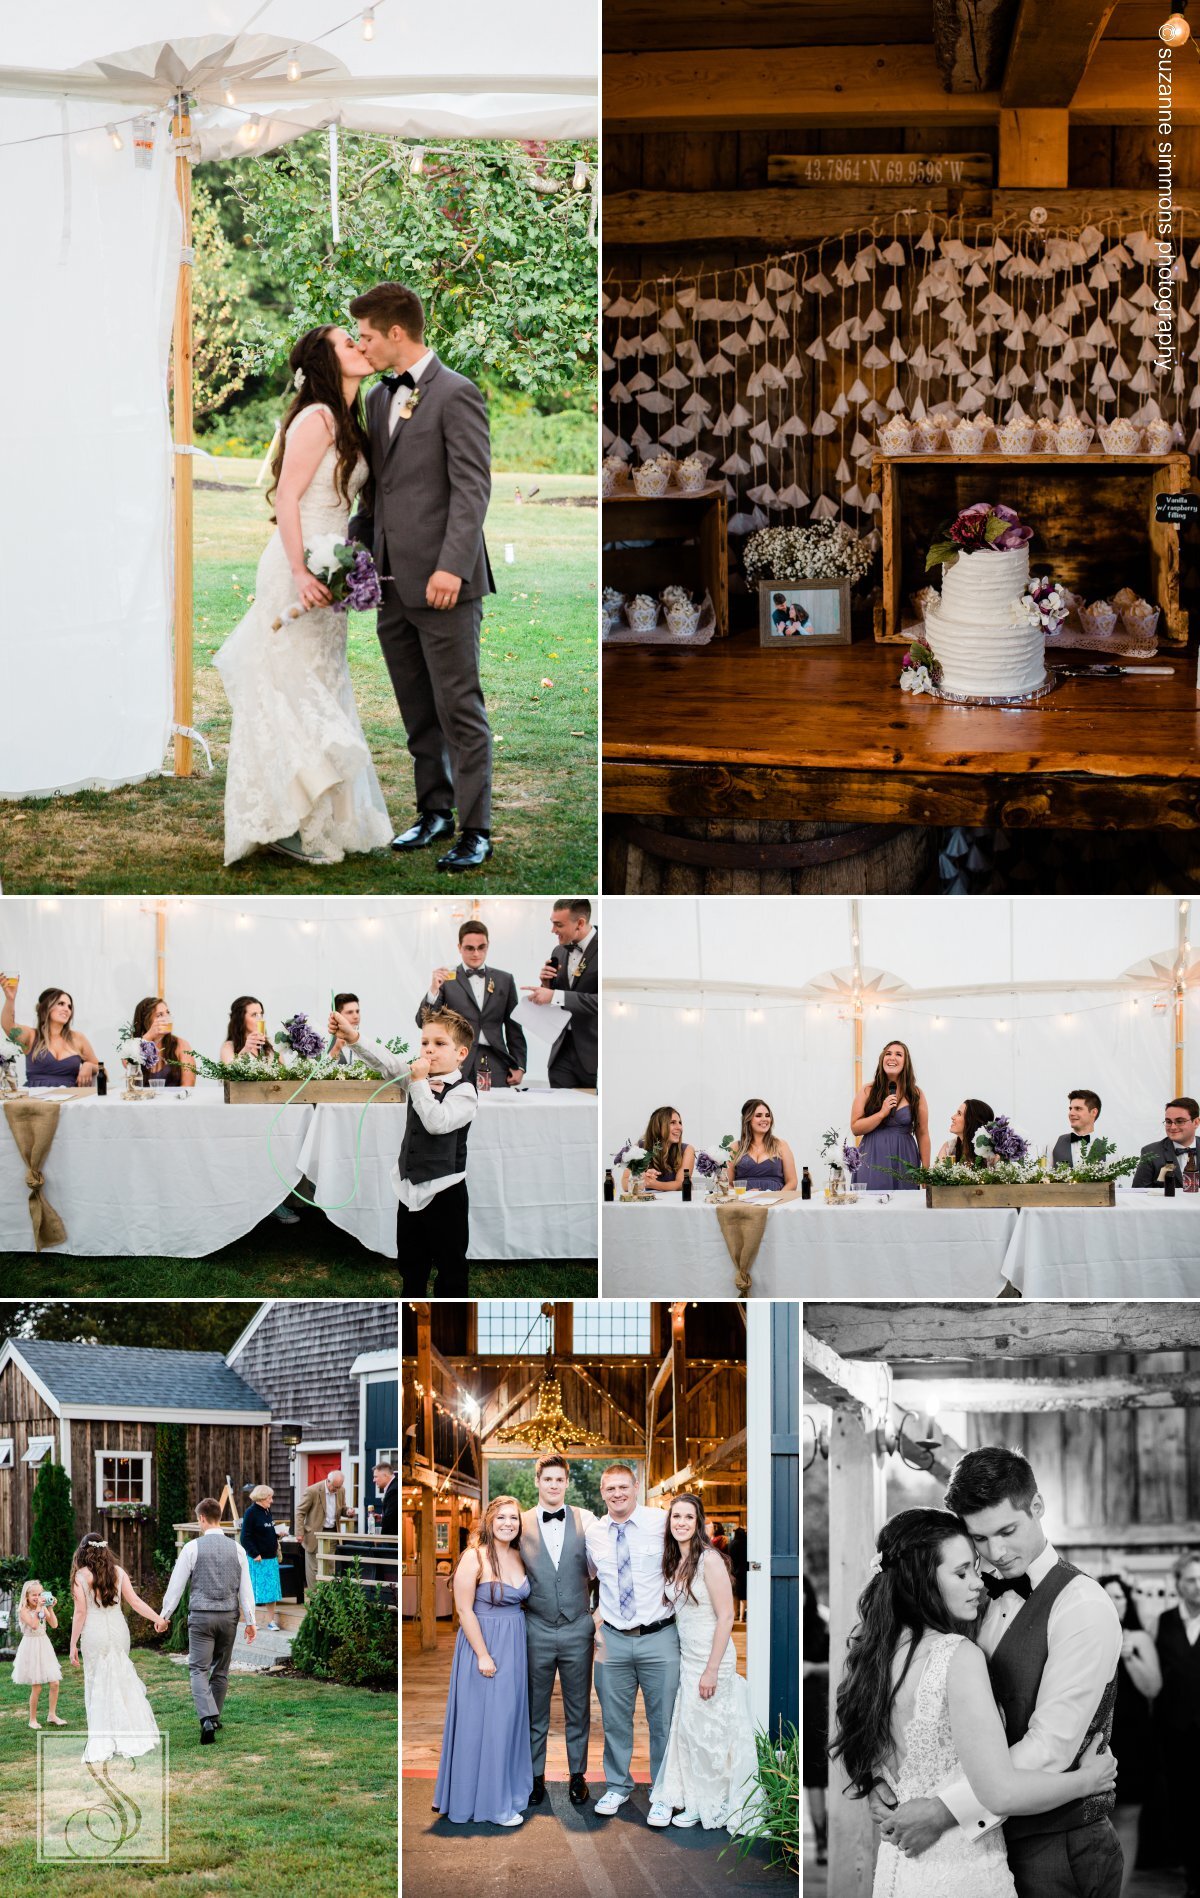 Tented wedding reception in Harpswell, Maine